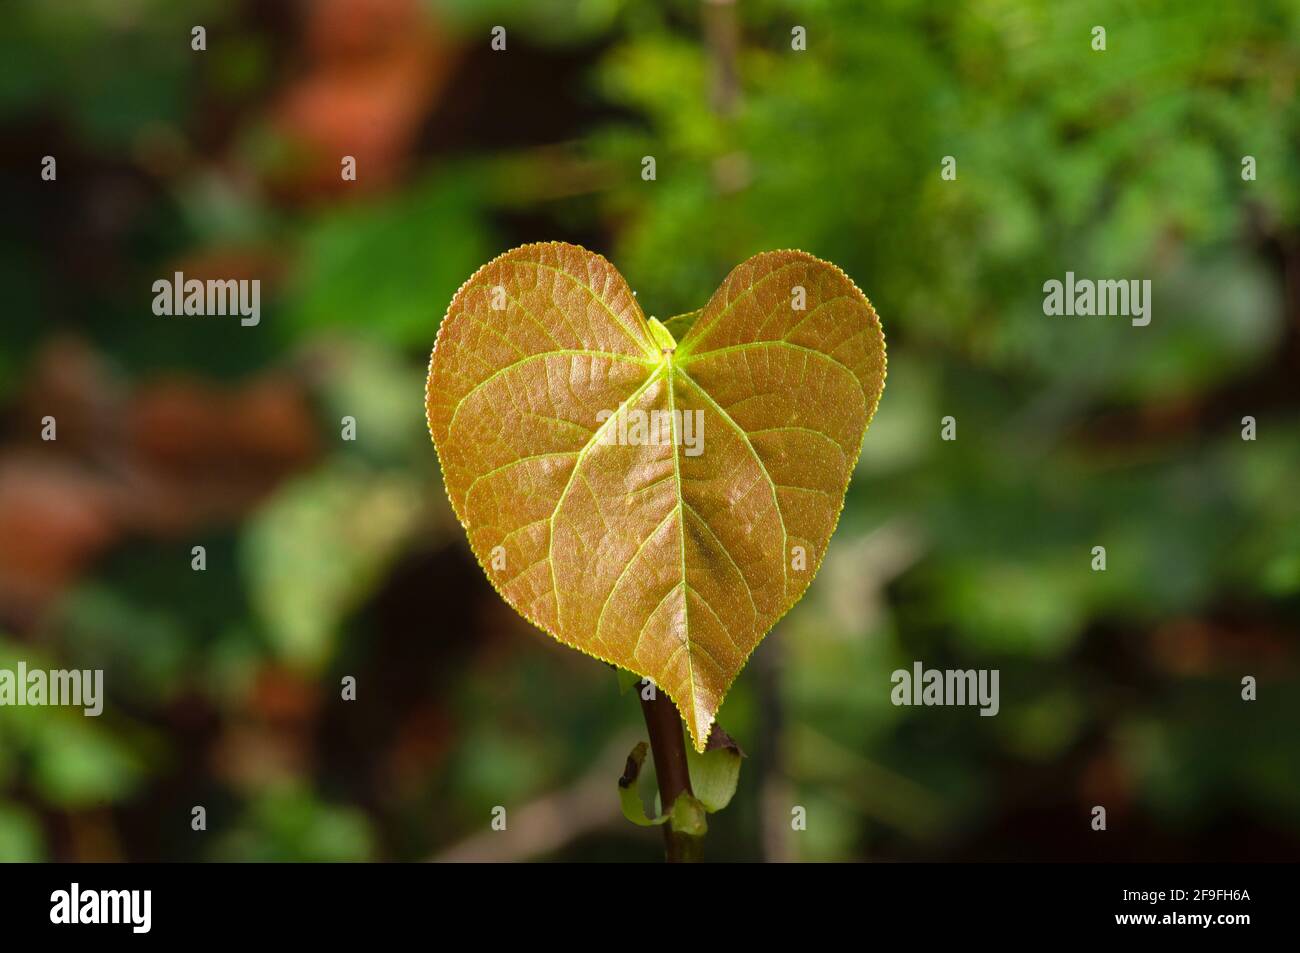 A young Sea Hibiscus (Hibiscus tiliaceus) leaf, Coast cottonwood, a symbol of love and a spade bridge card, in shallow focus Stock Photo